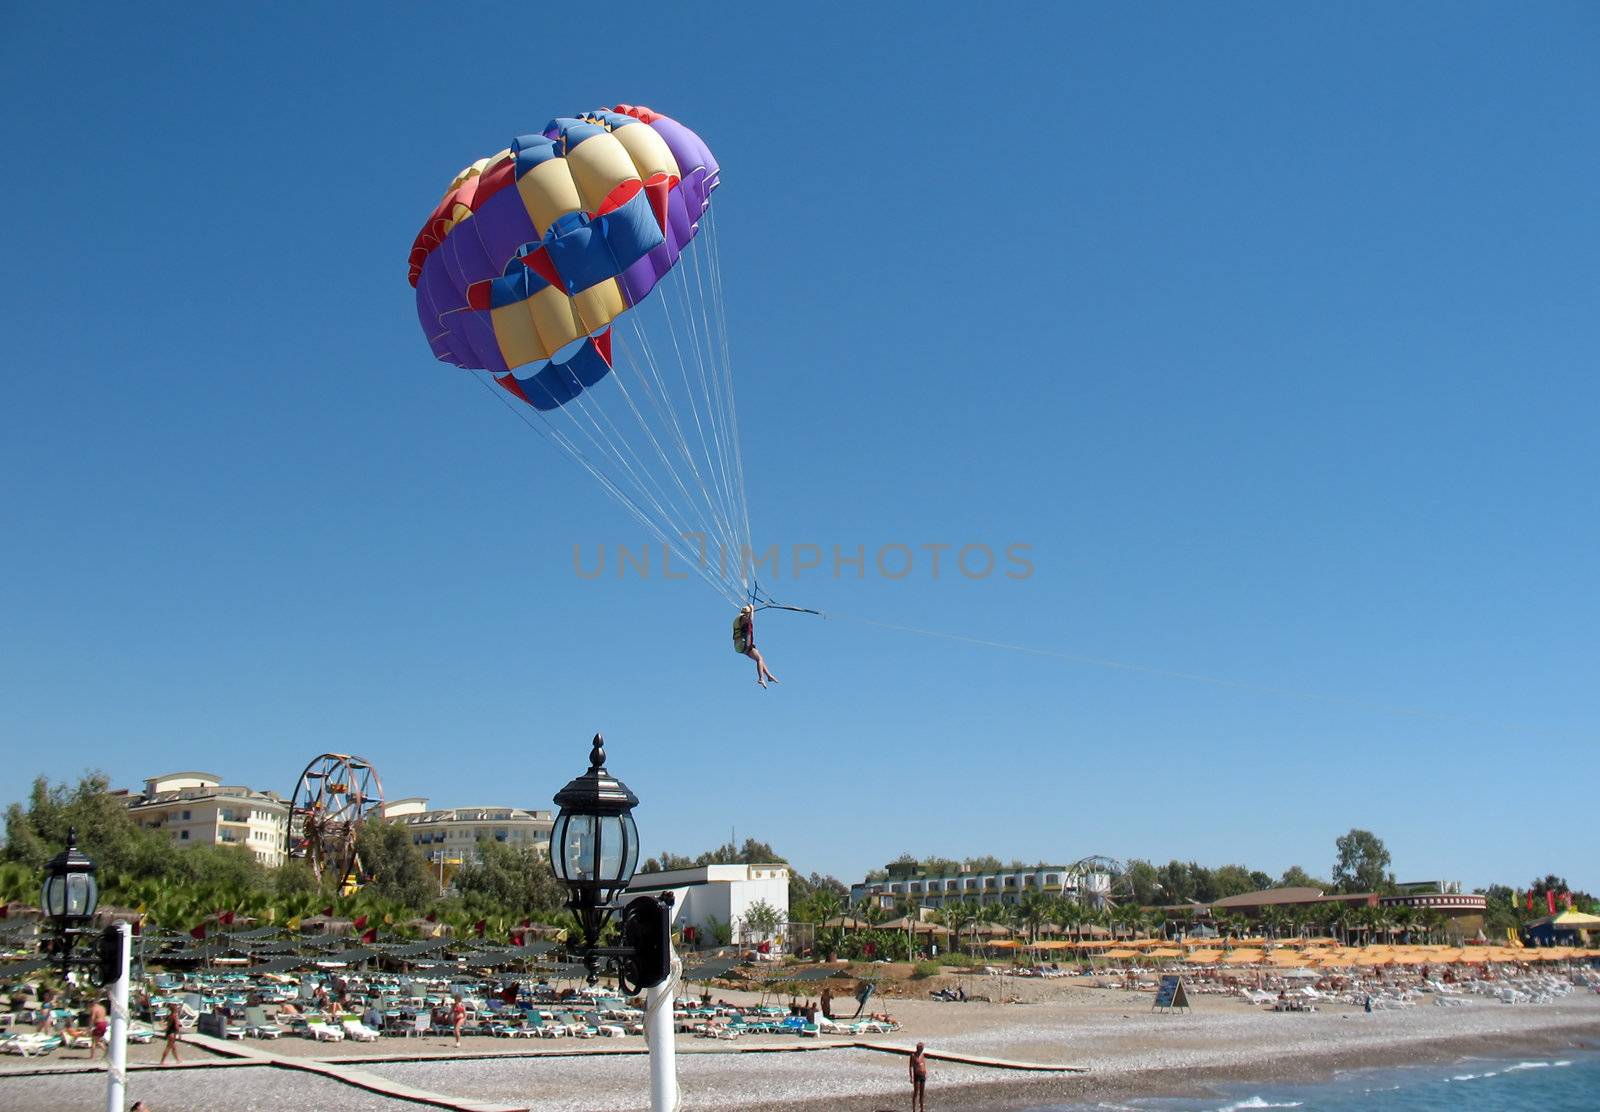 Skydiving on a beach. by julien